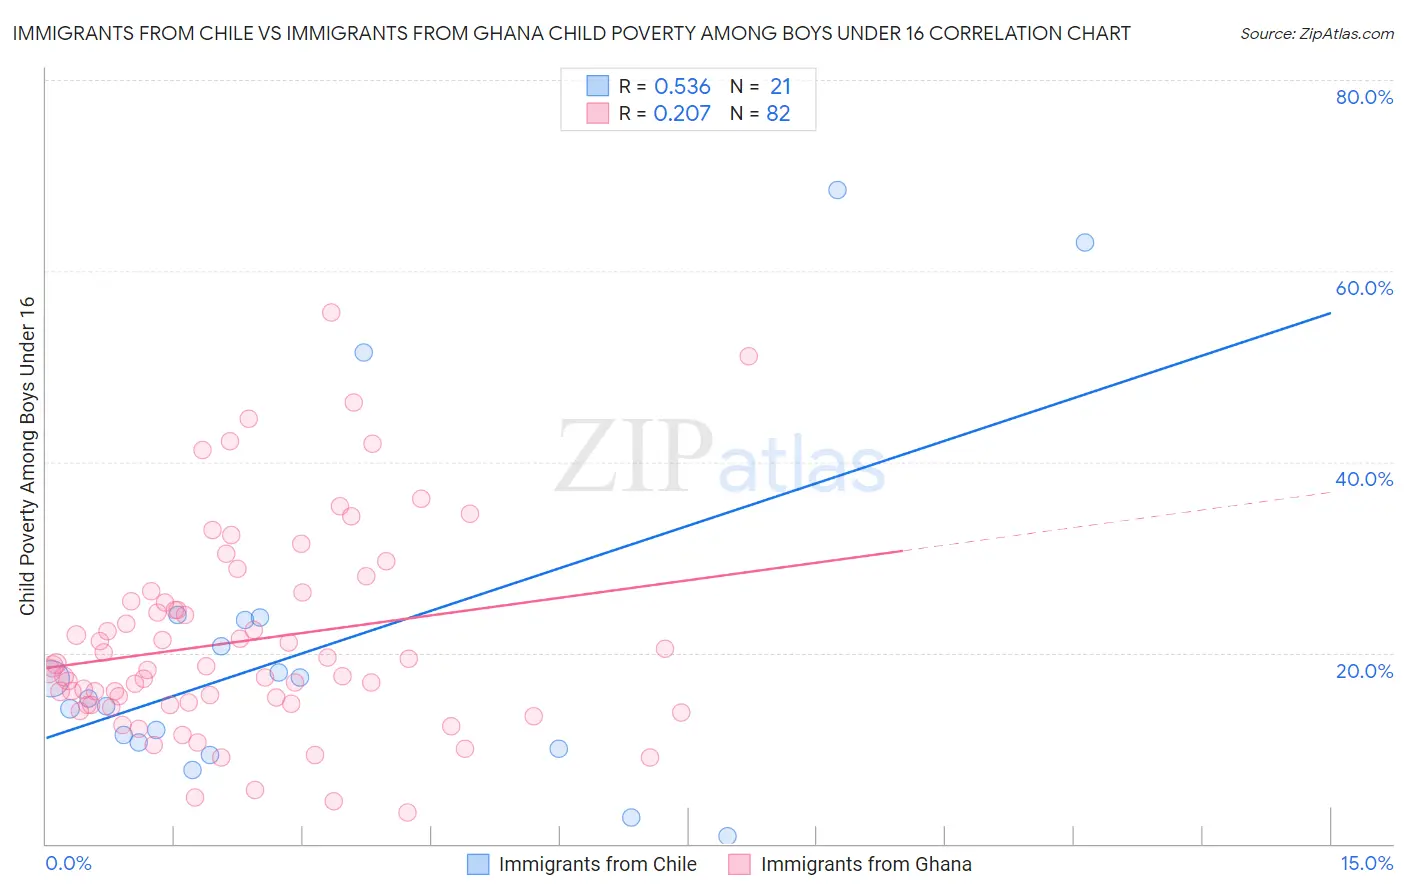 Immigrants from Chile vs Immigrants from Ghana Child Poverty Among Boys Under 16